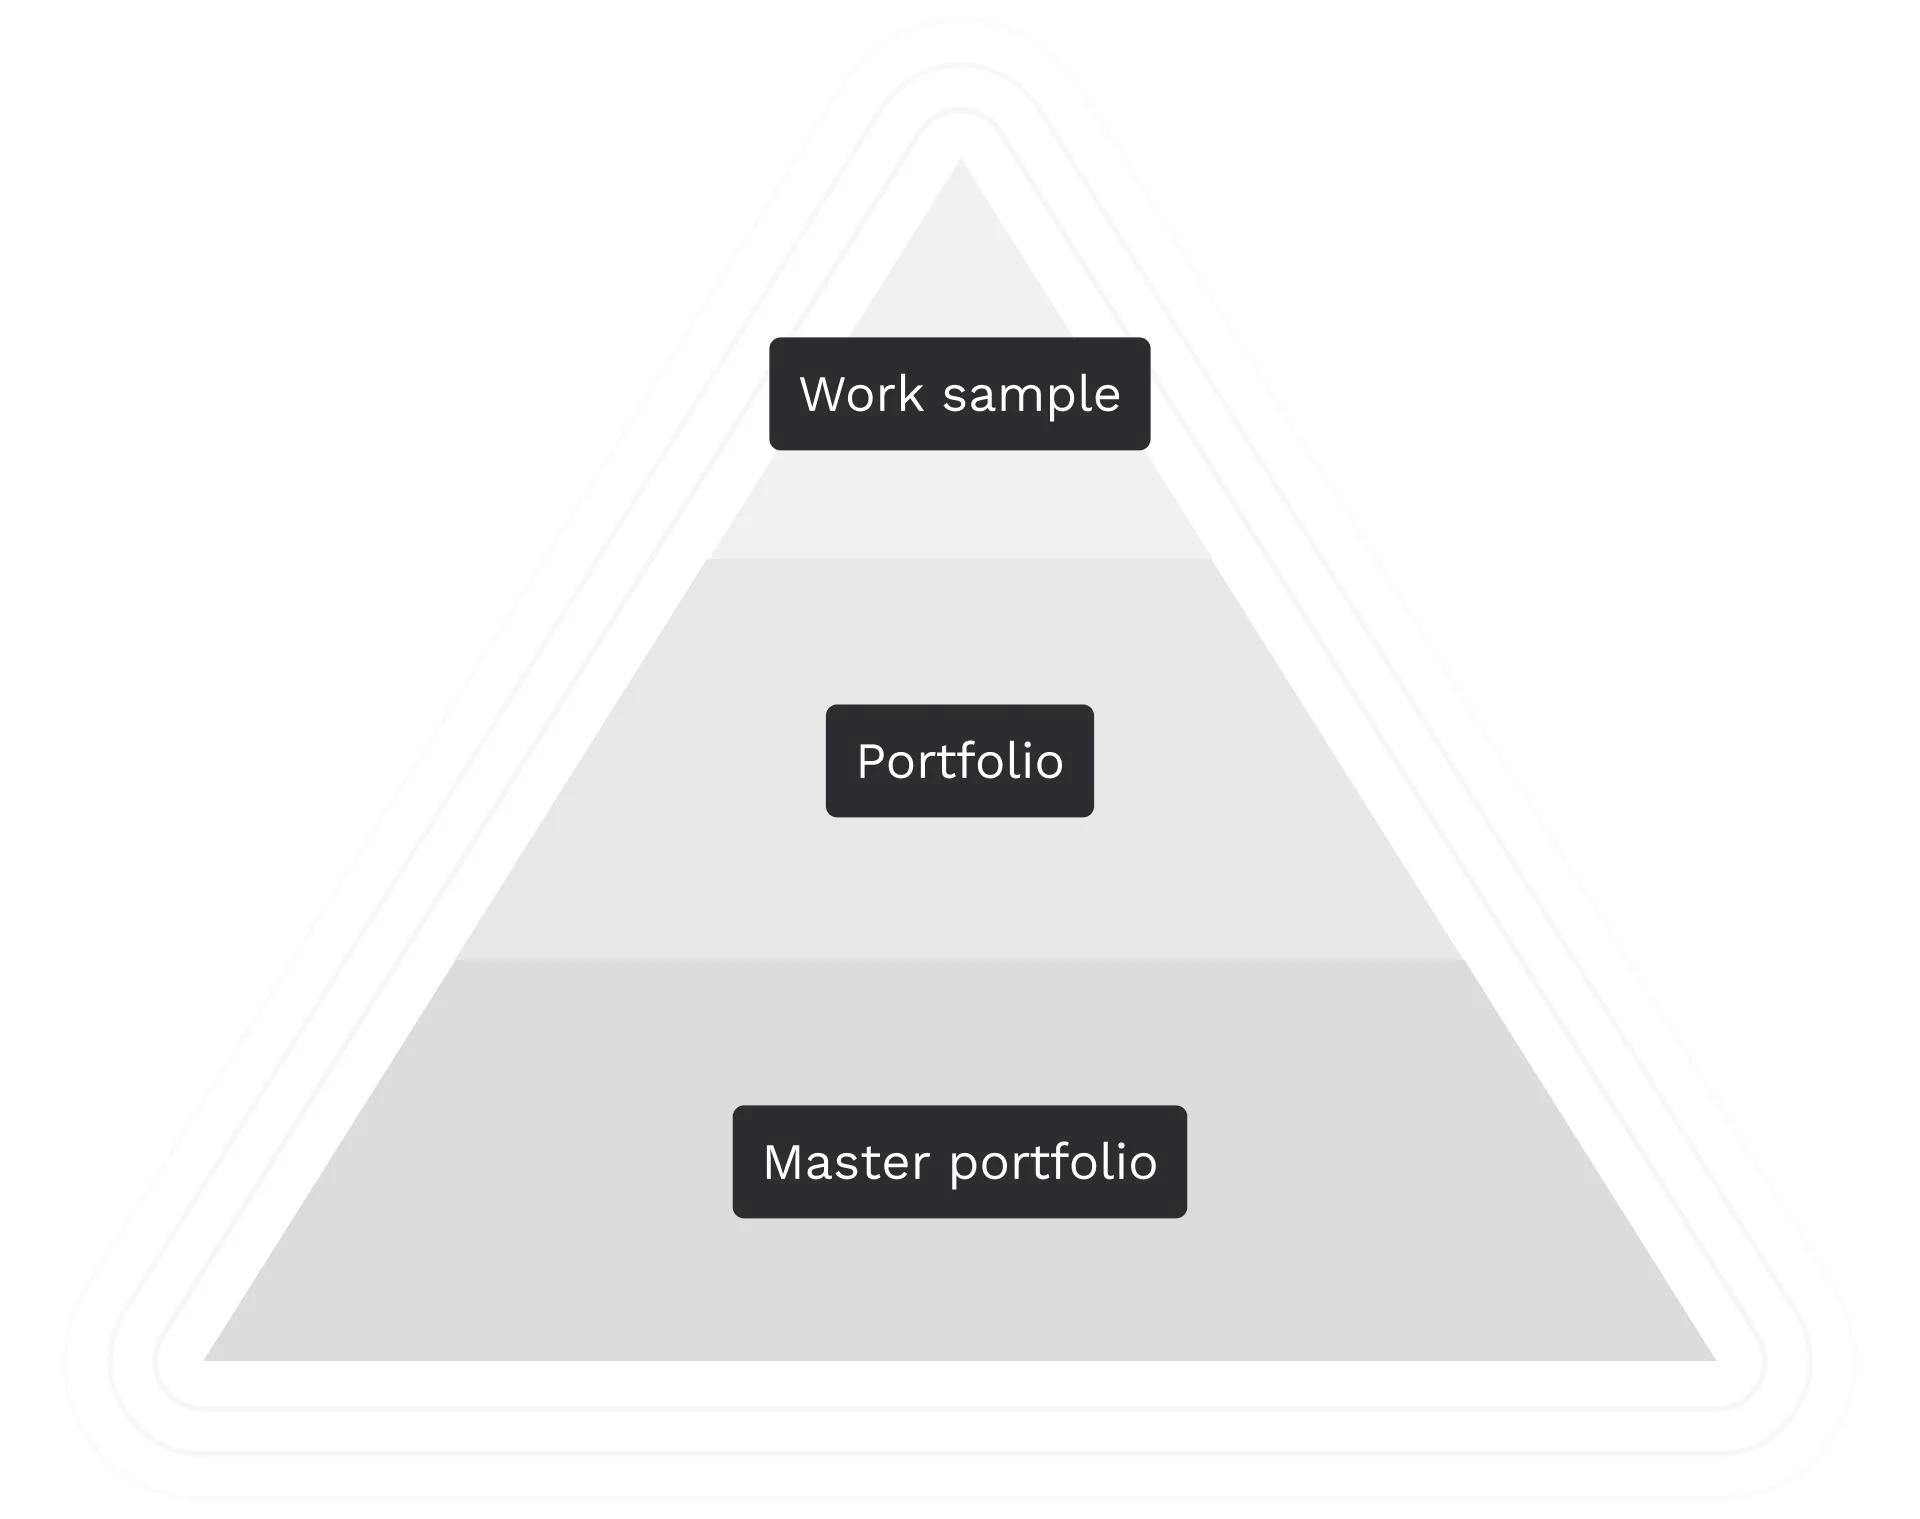 A pyramid of portfolios. At the bottom, we have the master portfolio, which is the most broad concept, while work sample is on the top, being the most specific.